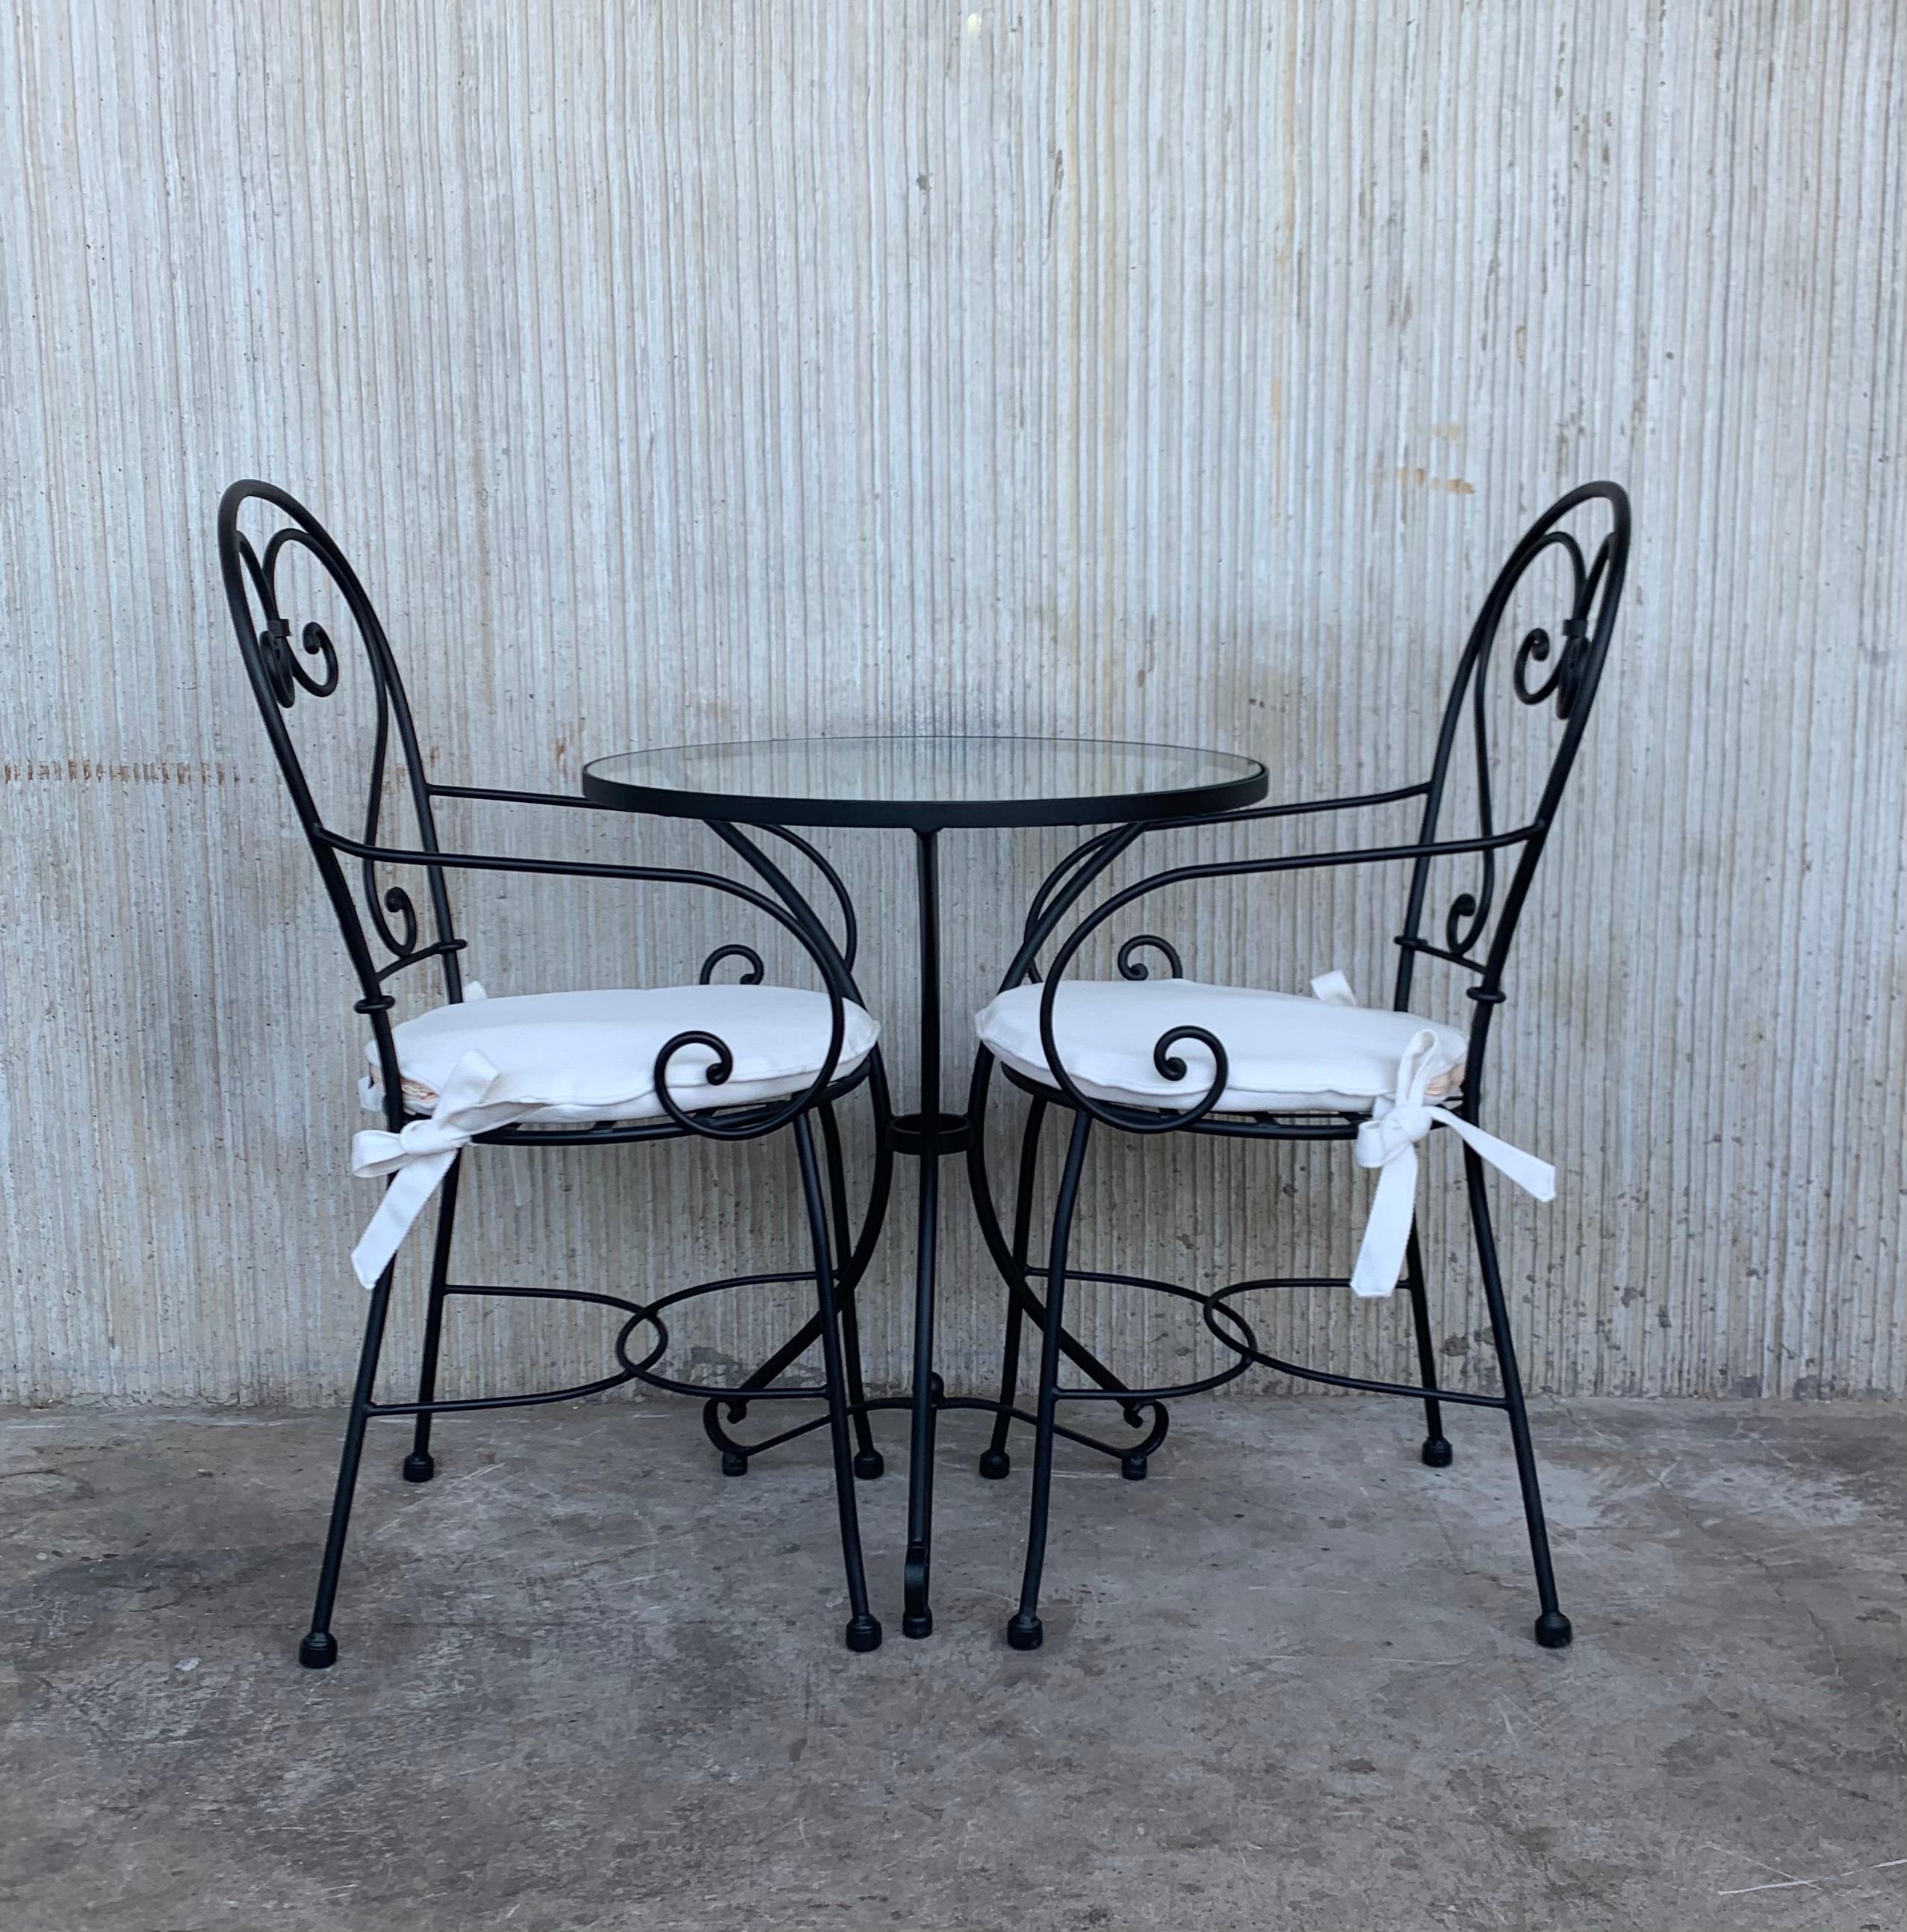 French Provincial New French Wrought Iron Painting Garden Bistro Outdoor Set